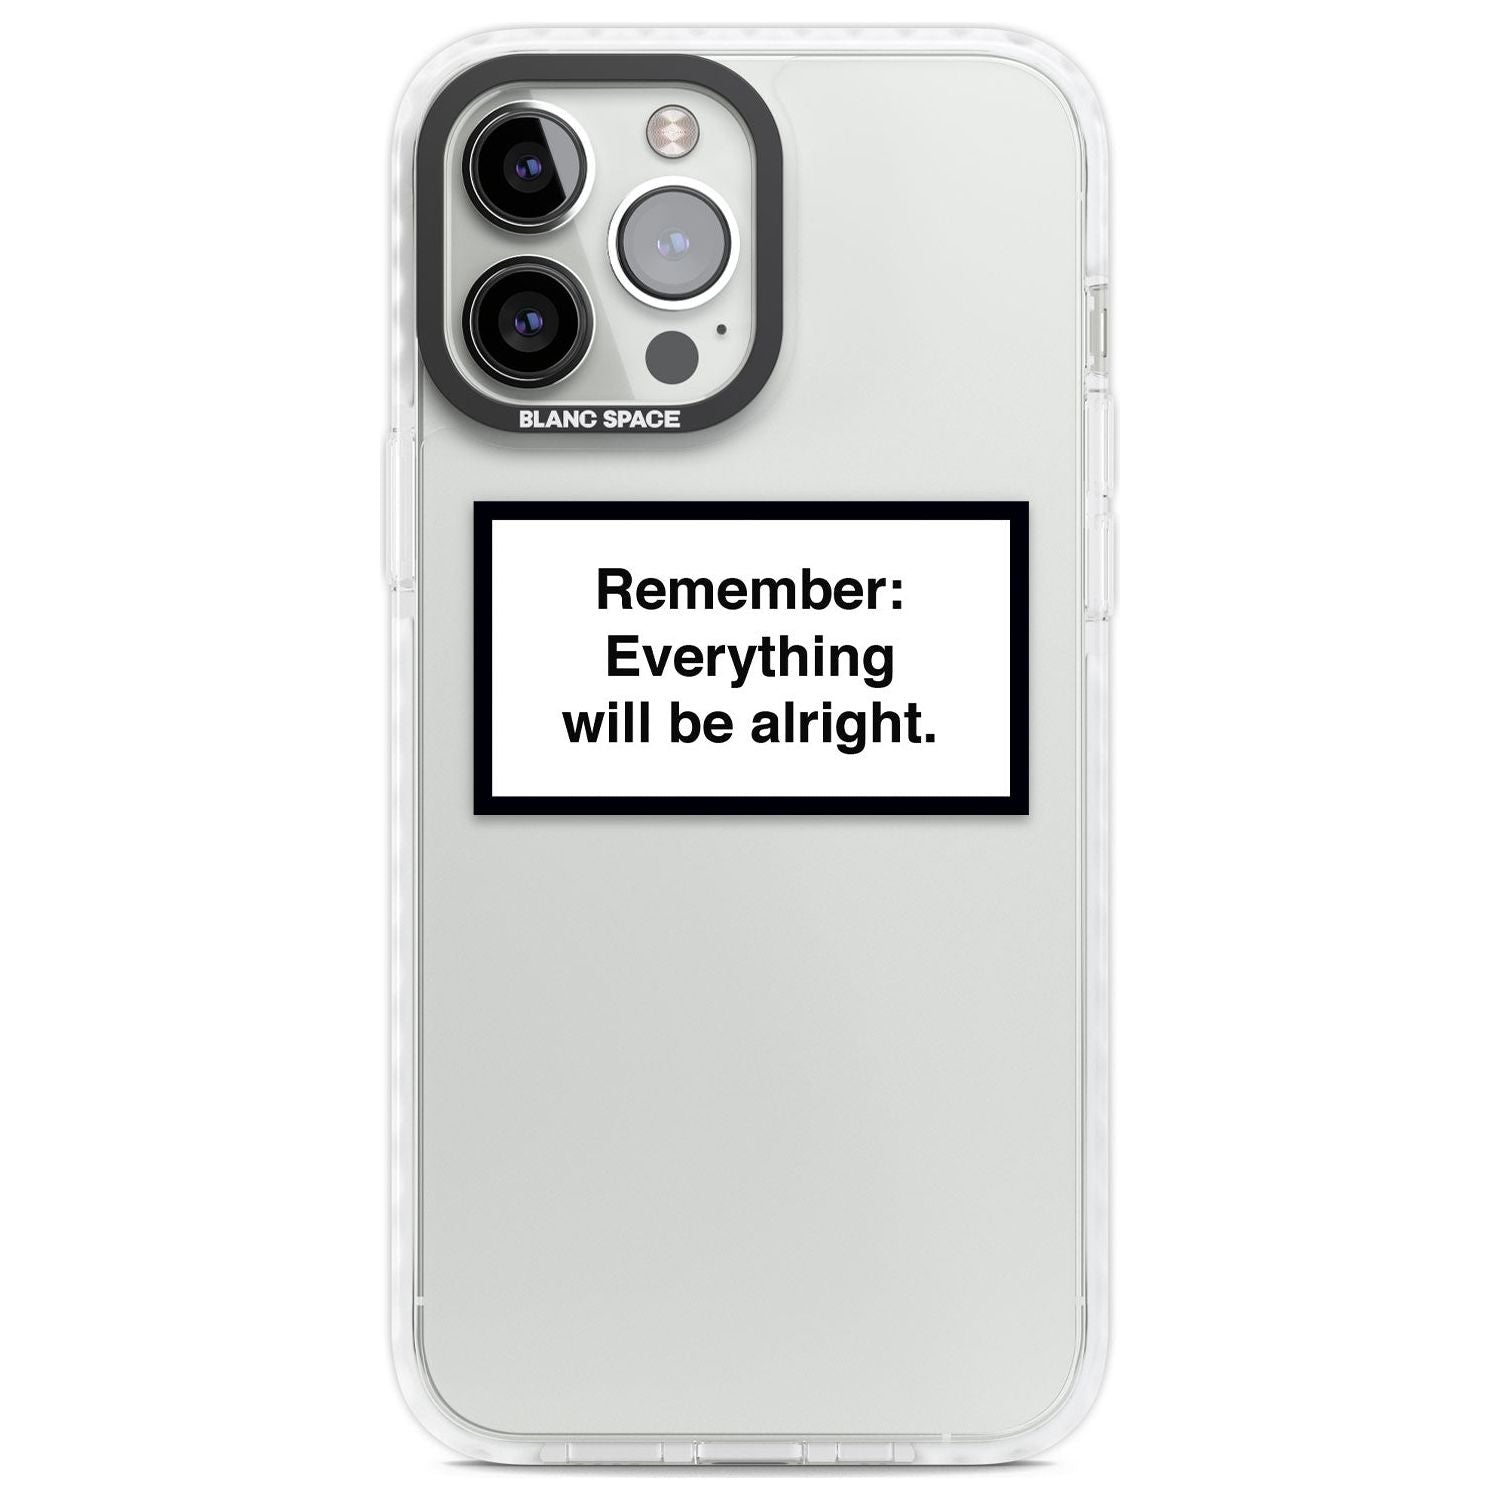 Everything Will Be Alright Phone Case iPhone 13 Pro Max / Impact Case,iPhone 14 Pro Max / Impact Case Blanc Space